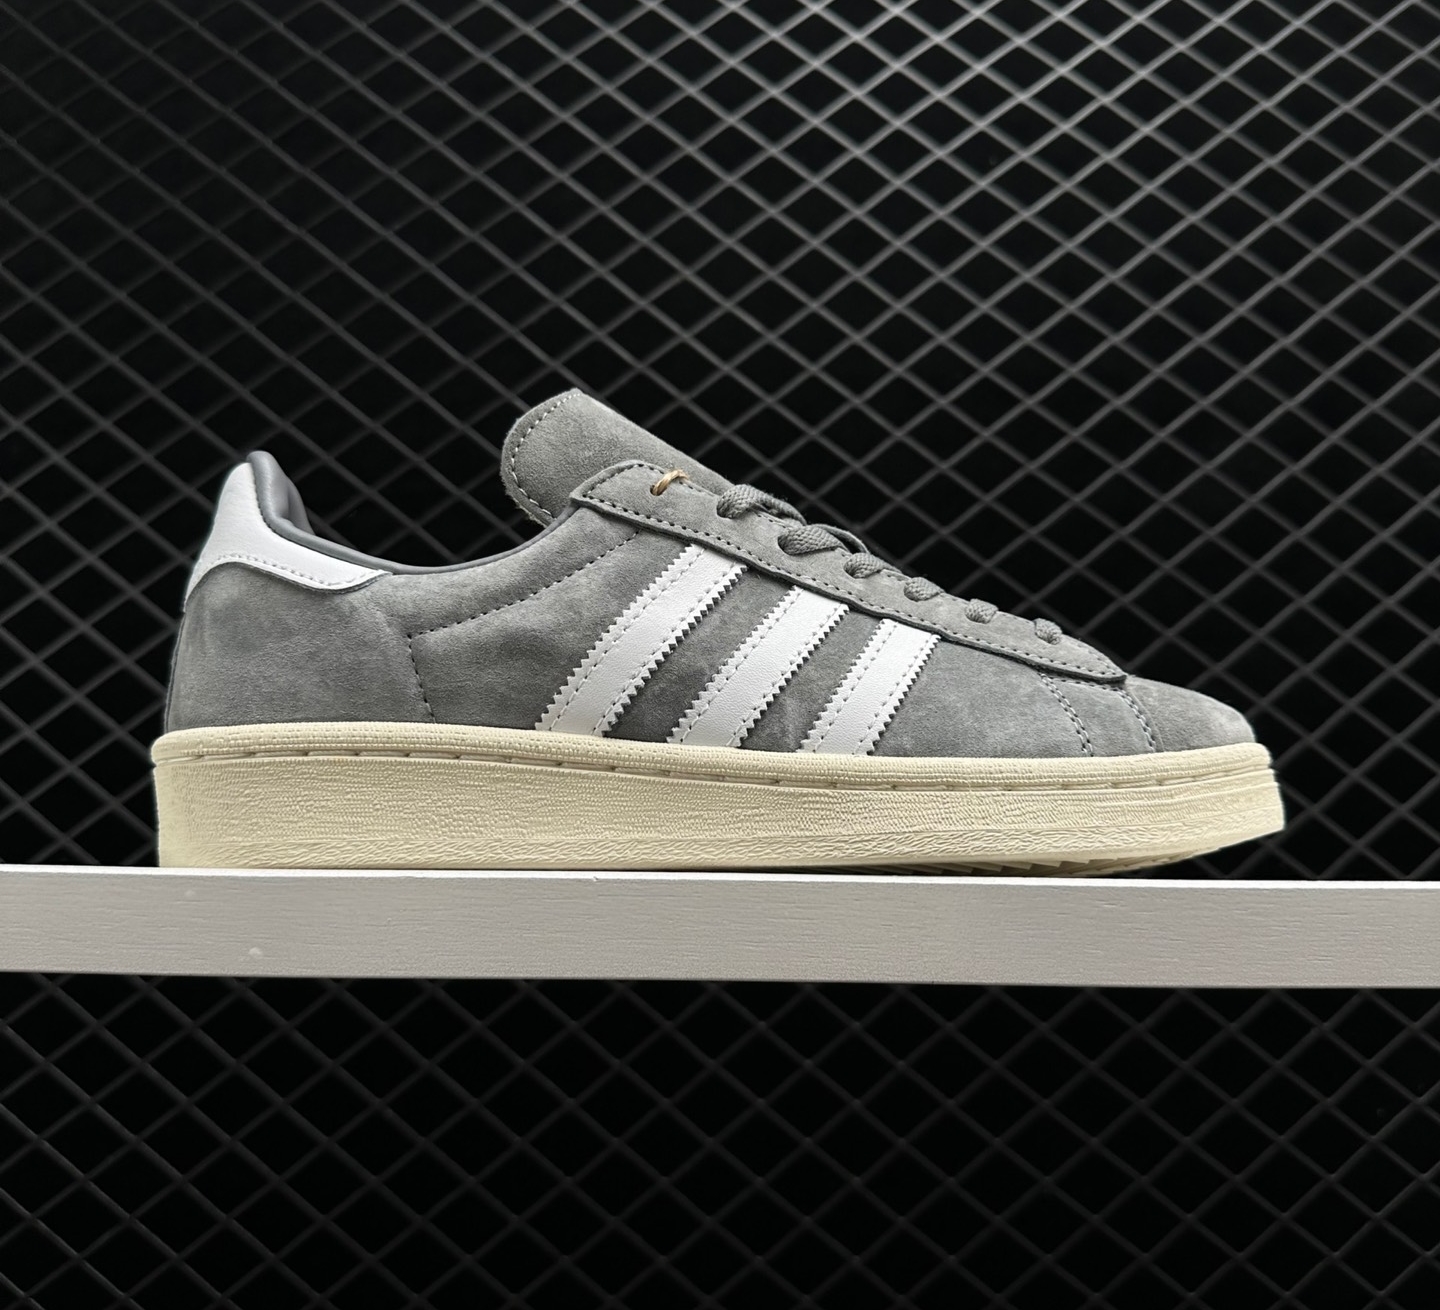 Adidas Campus 80s 'Grey' GX9406: Classic Style and Superior Comfort